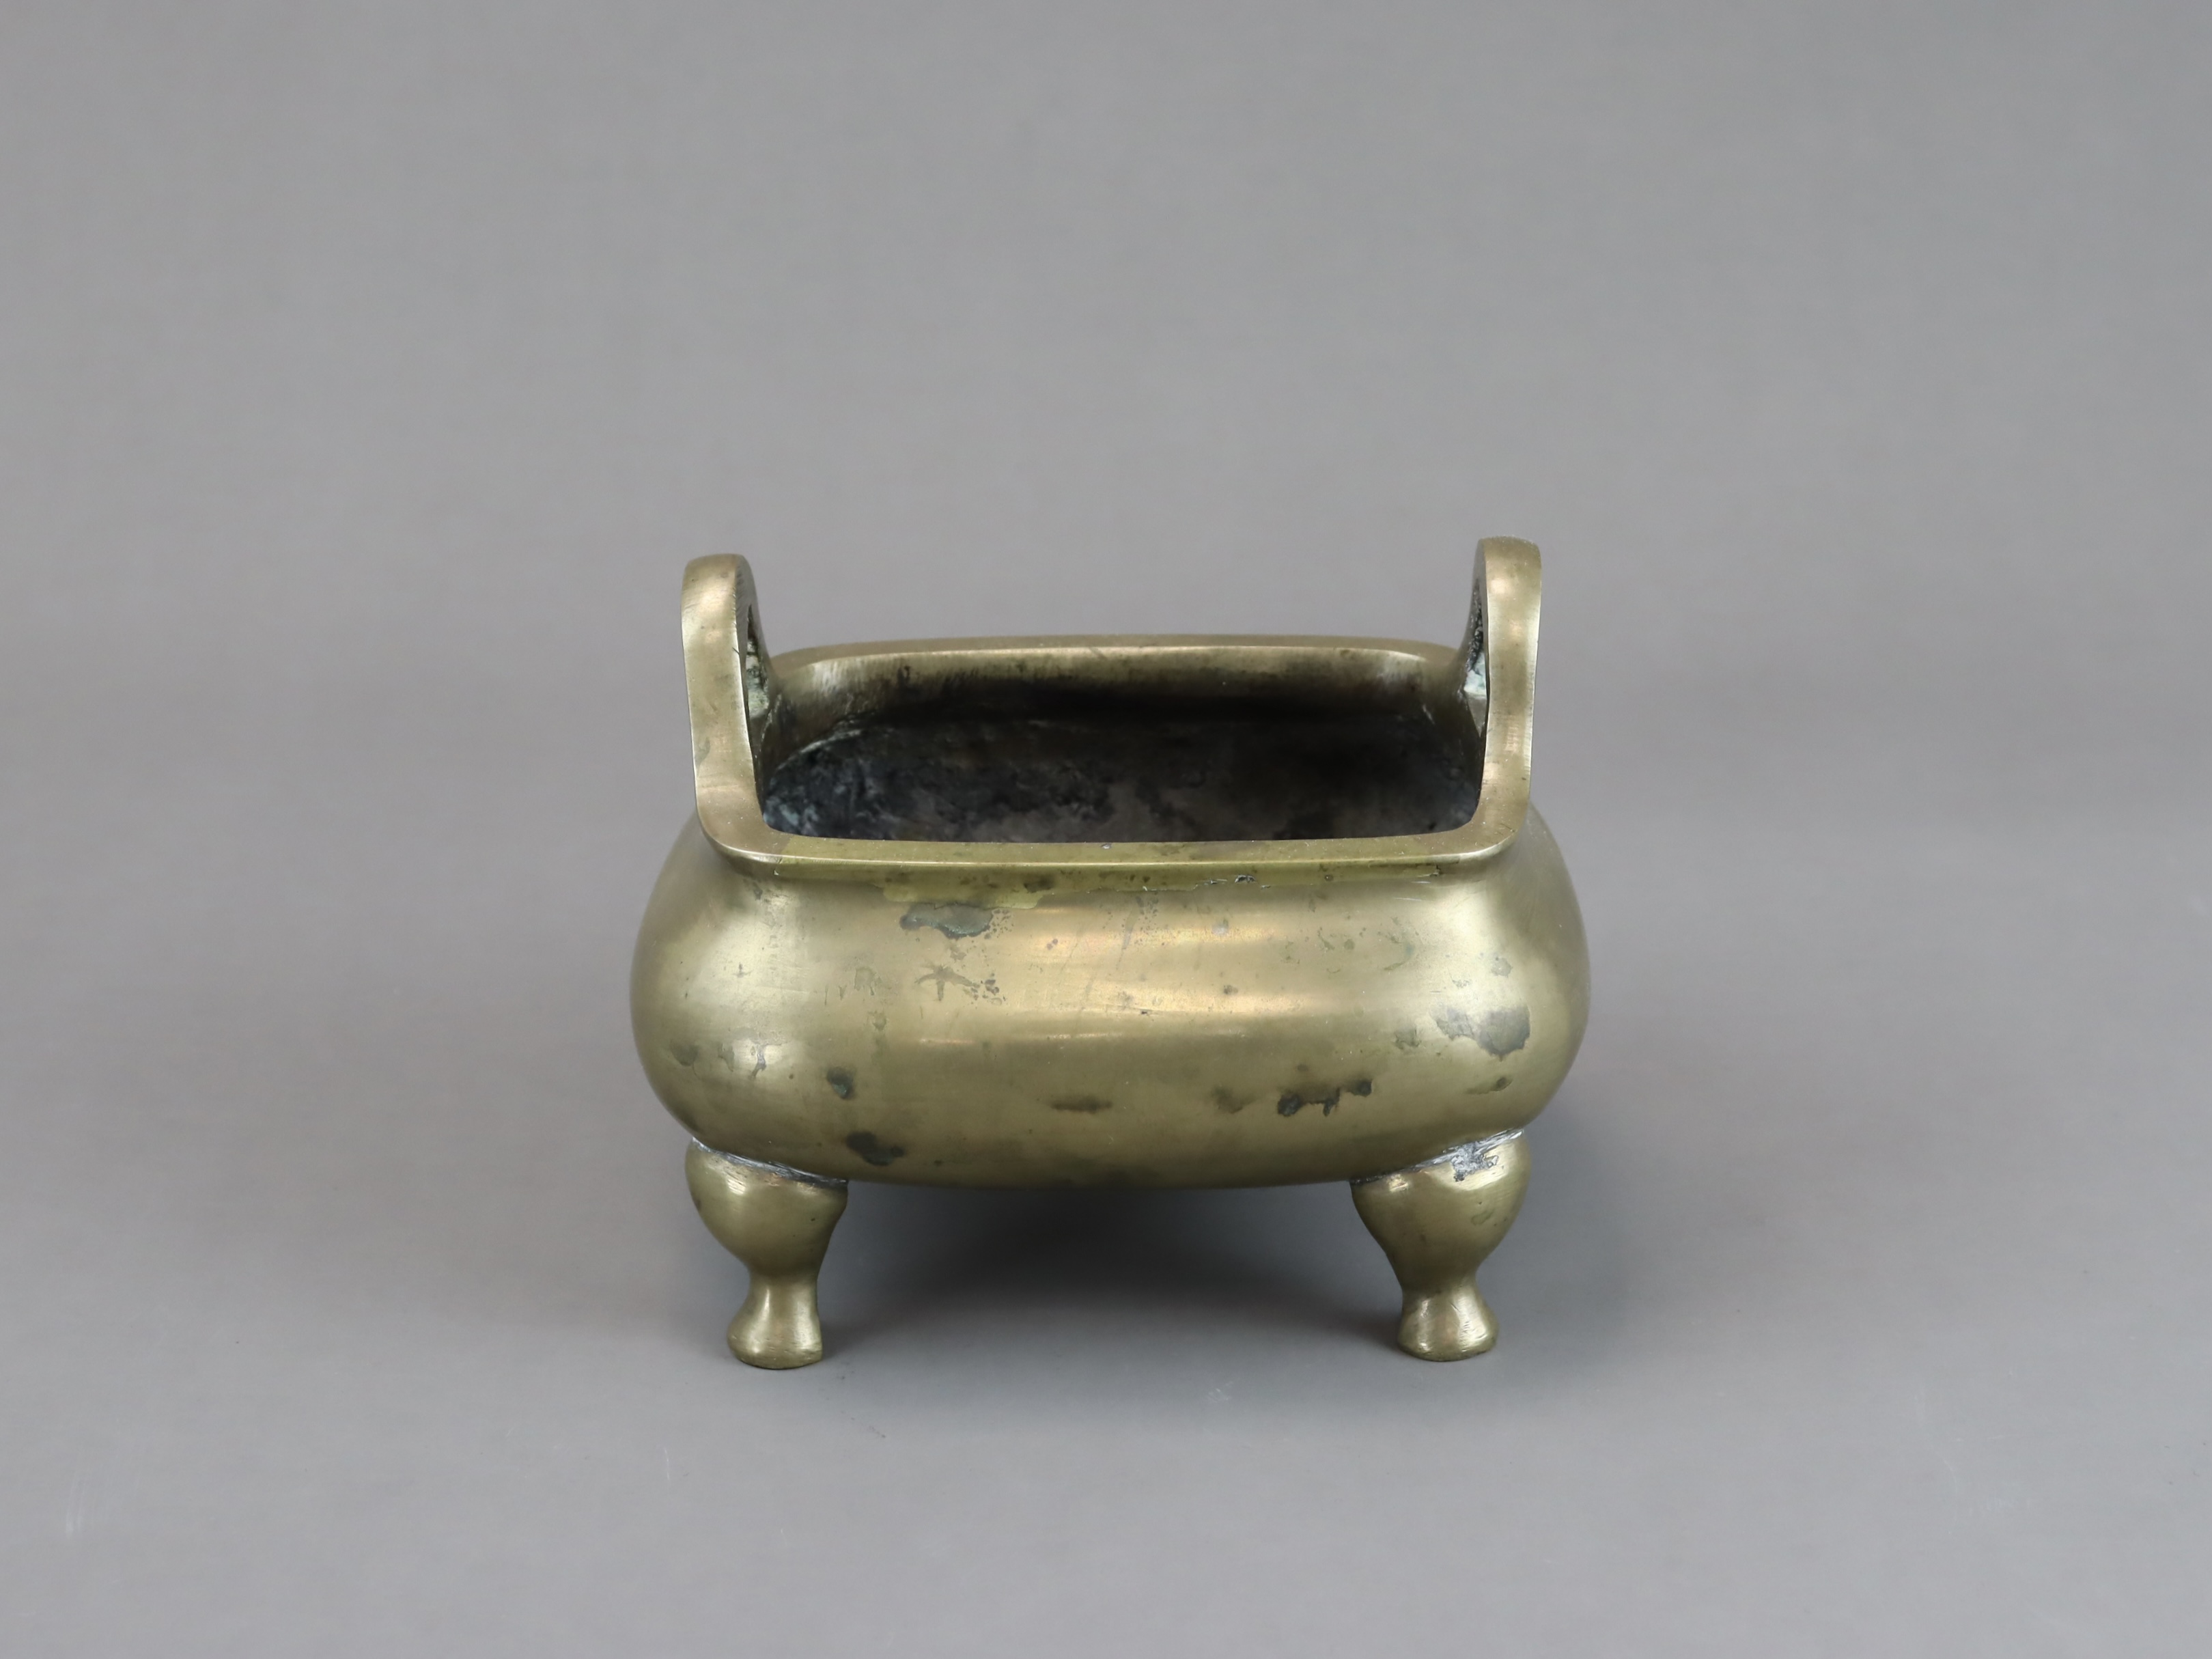 A four legged Bronze Censer, fang ding, seal mark, Qing dynasty - Image 5 of 7